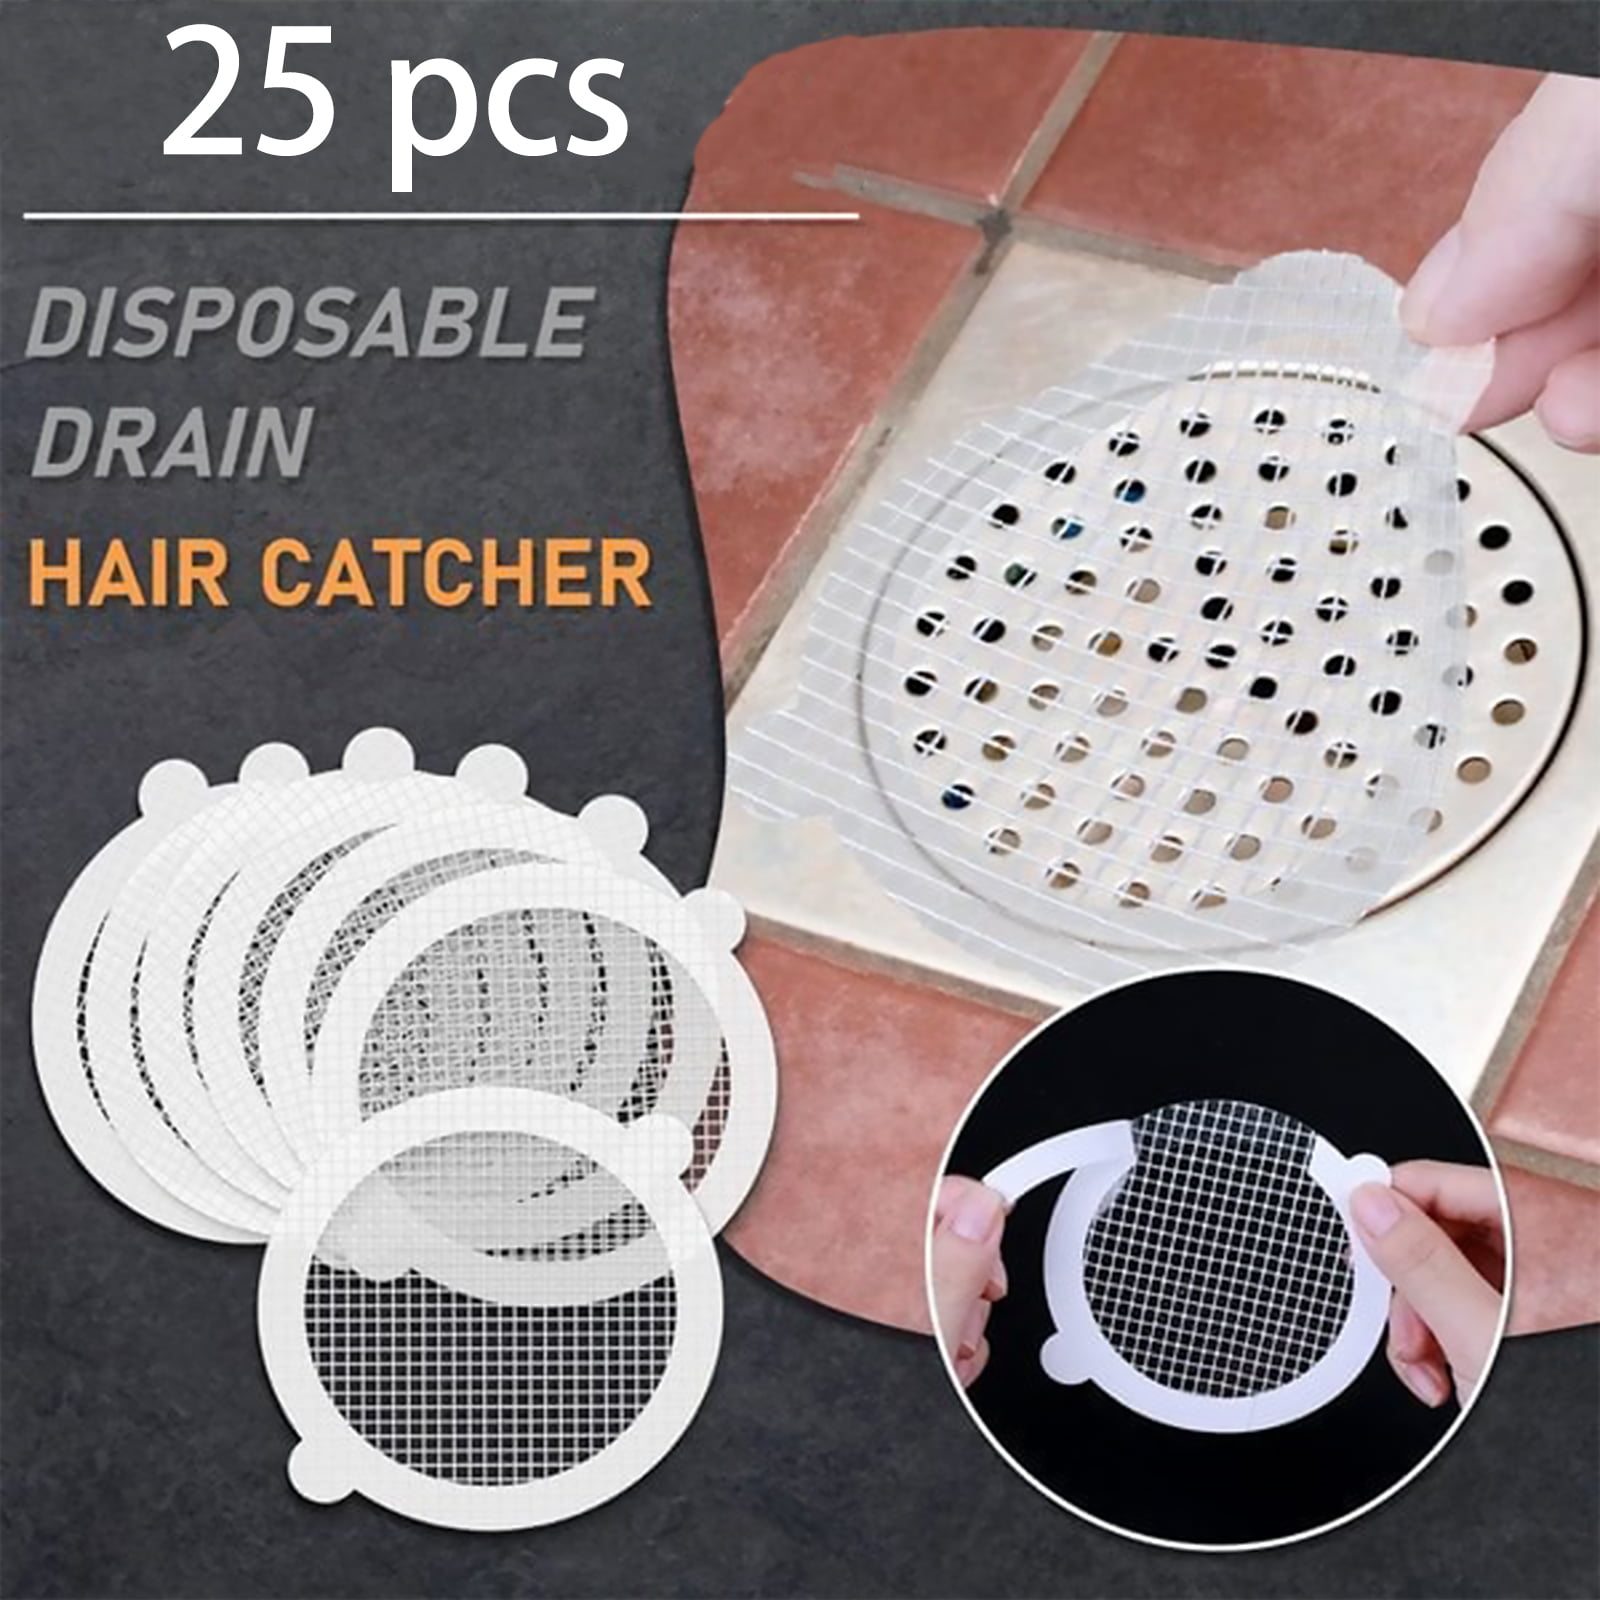 30 Pack, Classic Disposable Shower Drain Hair Catcher - Adhesive Mesh Stickers Drain Cover Hair Trapper Shower Filter, Round